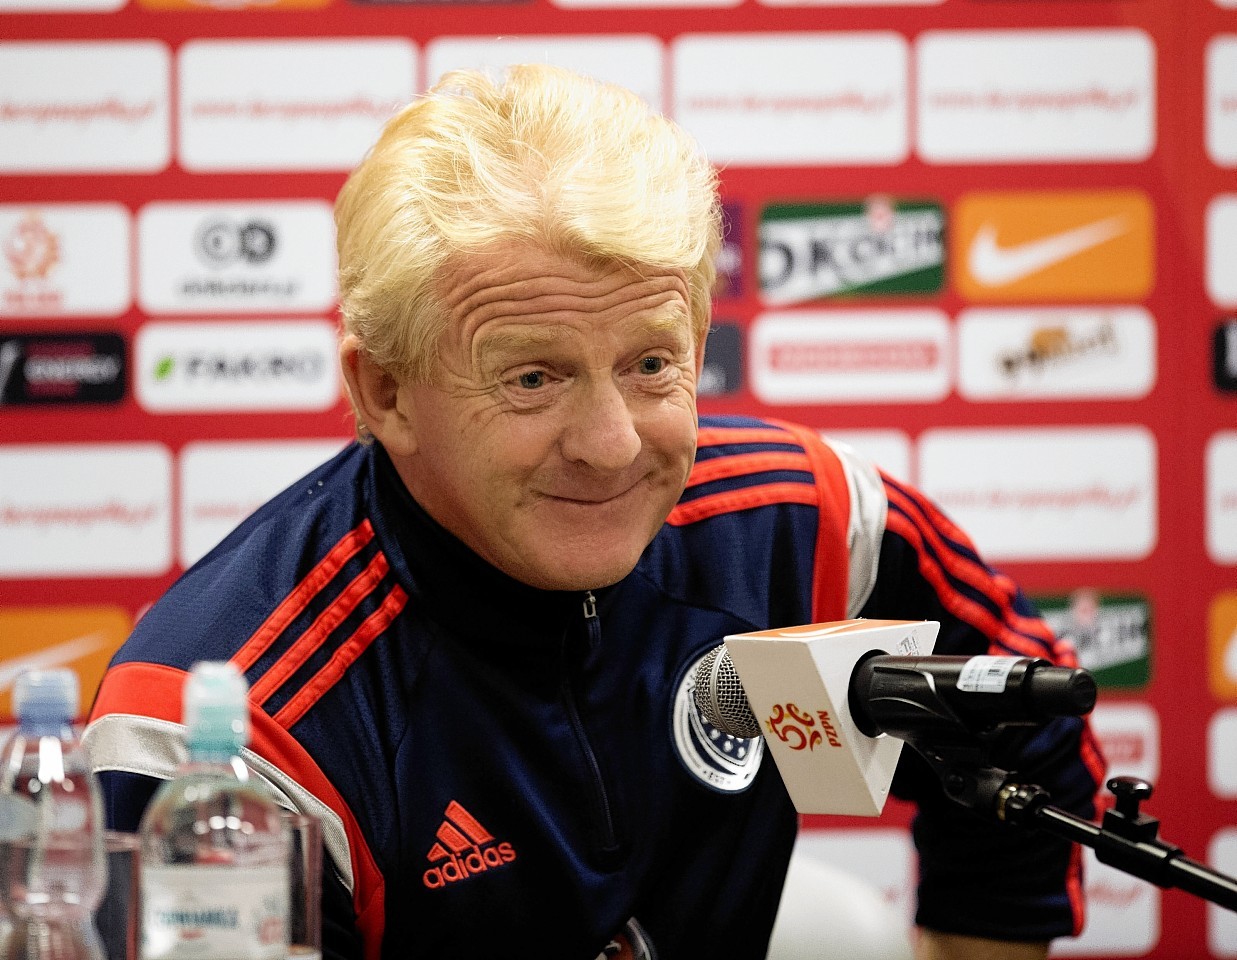 Gordon Strachan has handed a first call up to Bournemouth's Matt Ritchie